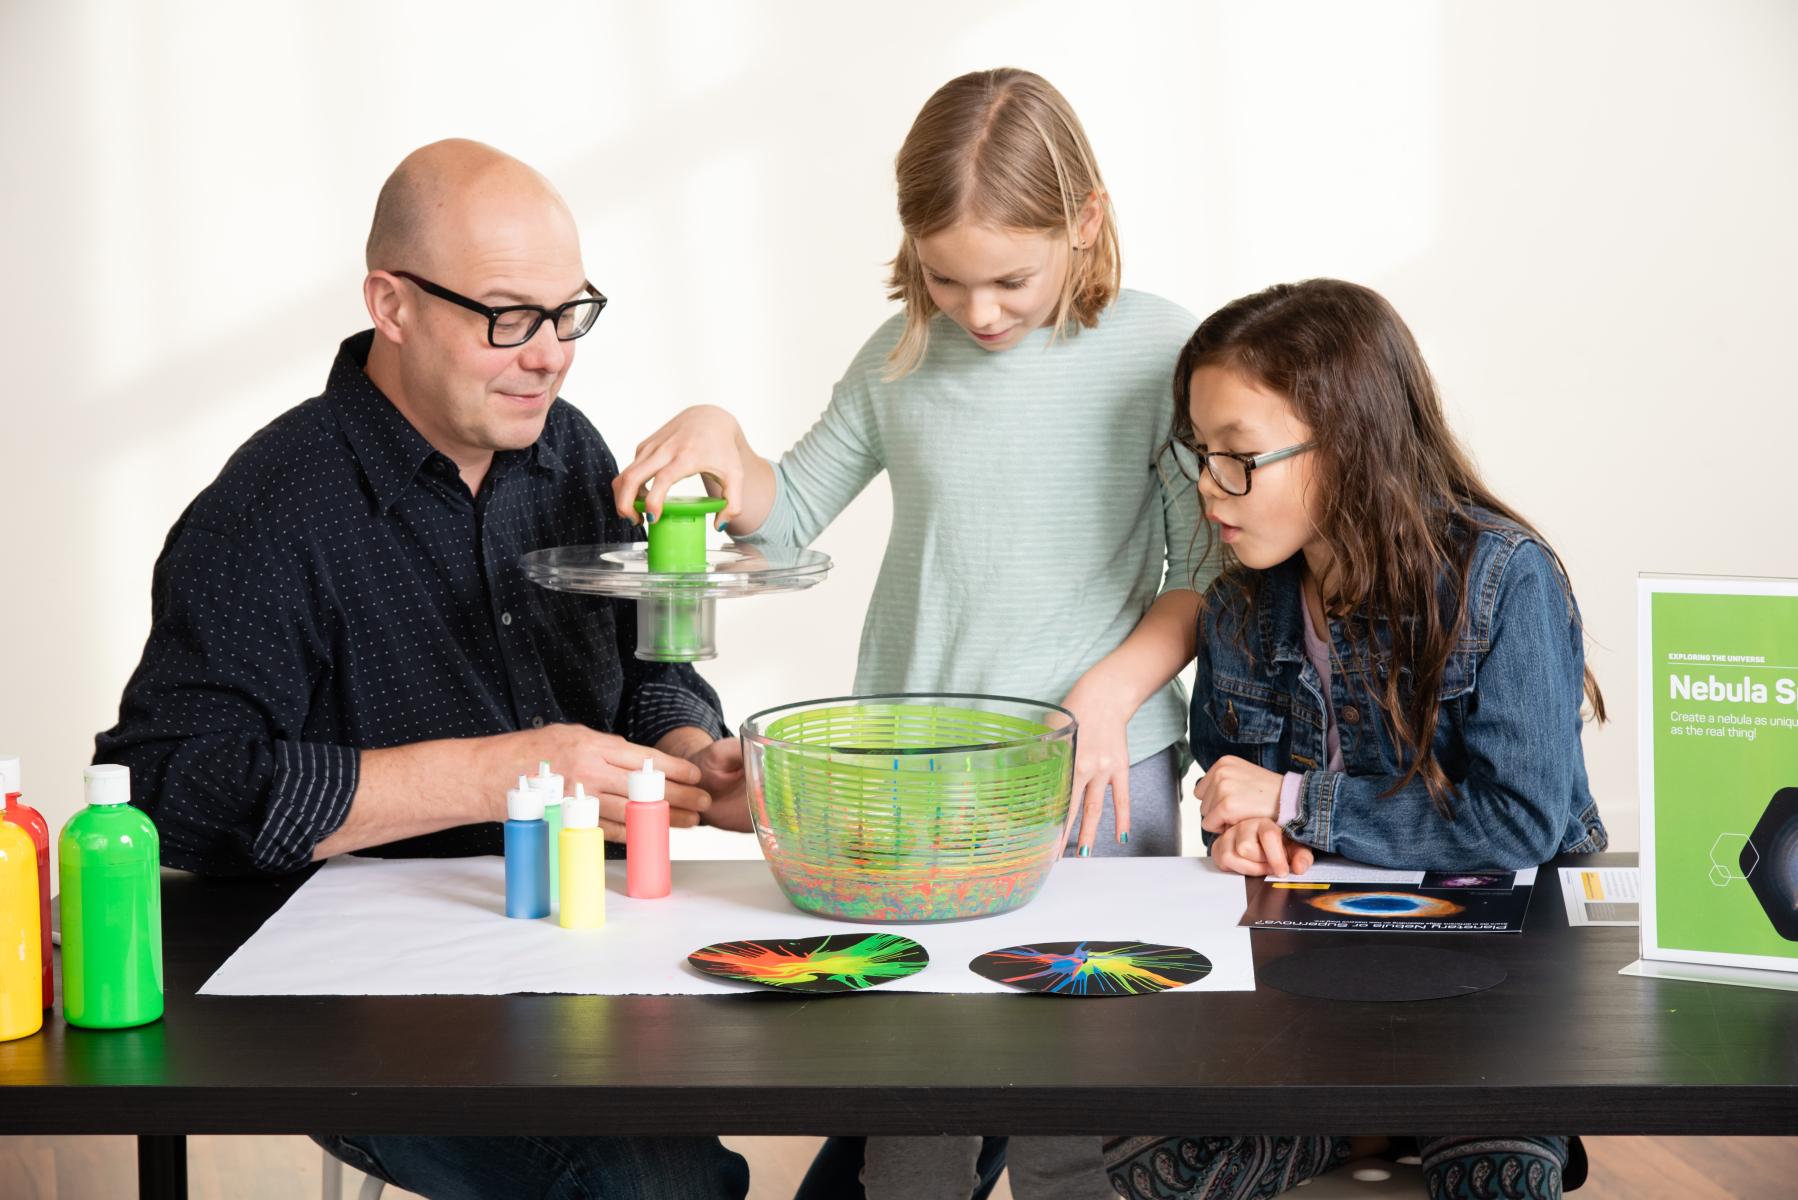 Family of three load a paper with paint into a salad spinner to create a paint nebula